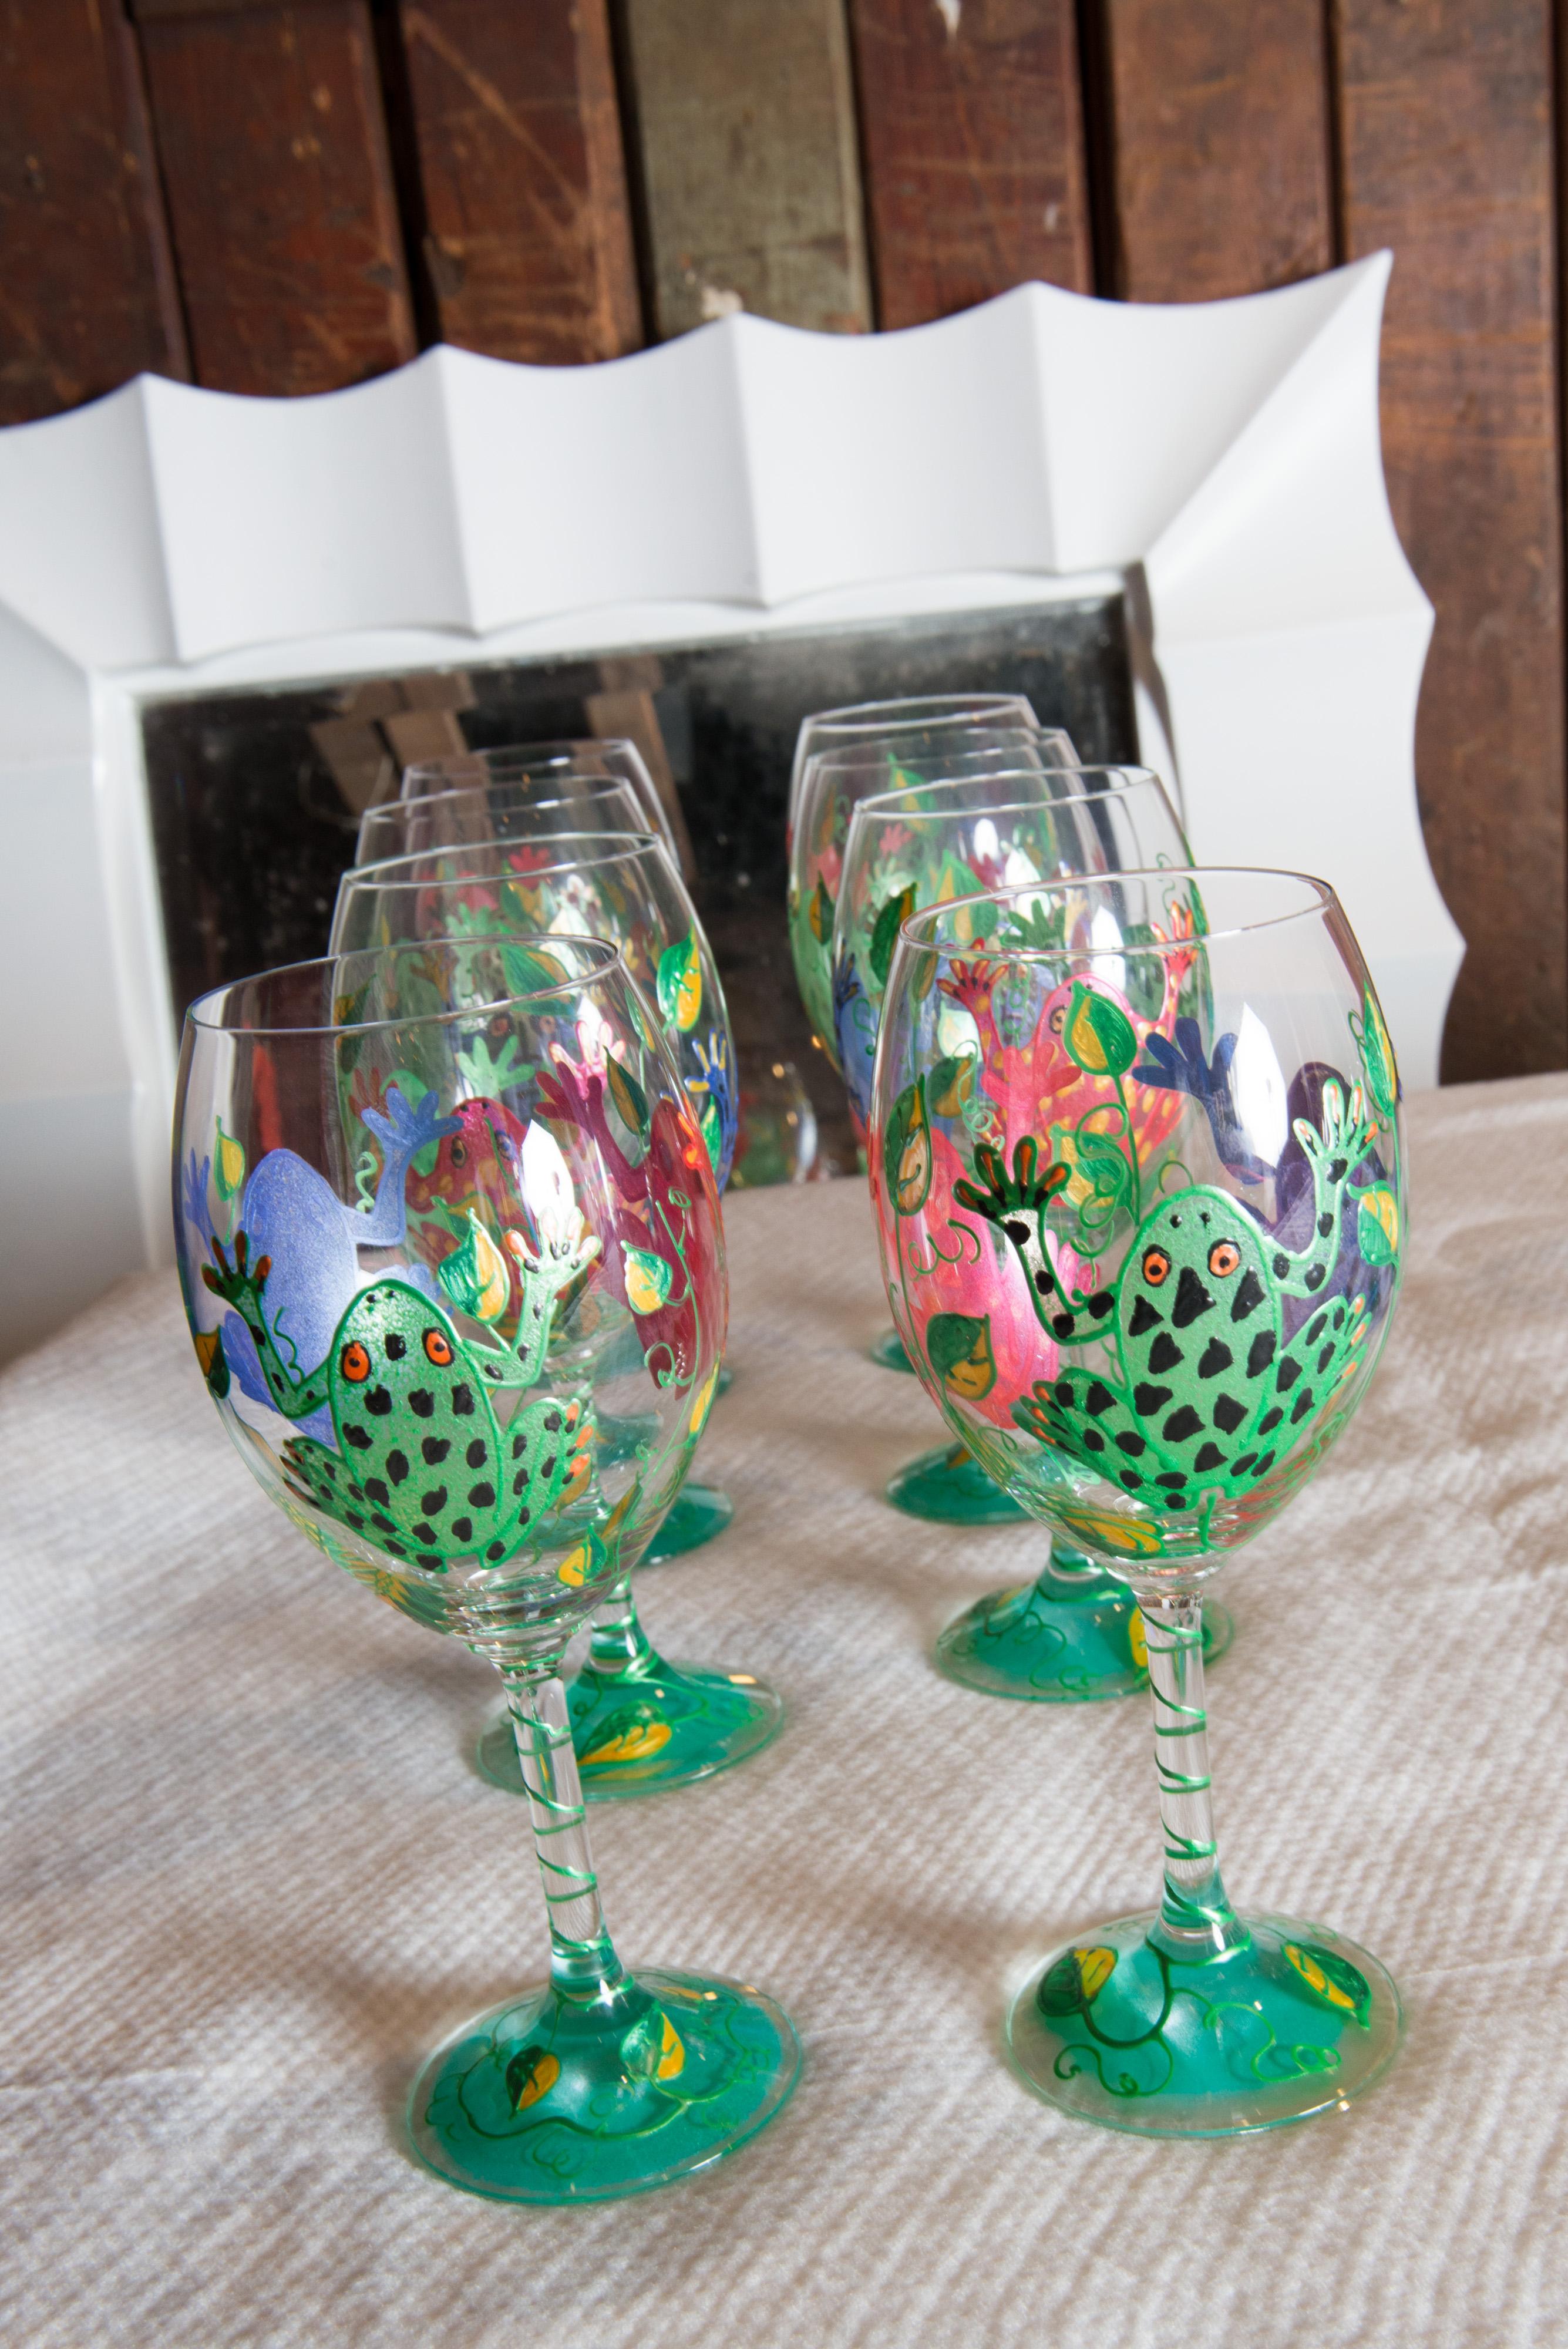 From the Mrs Henry Ford II estate- a whimsical set of colorful frog decorated white wine glasses.